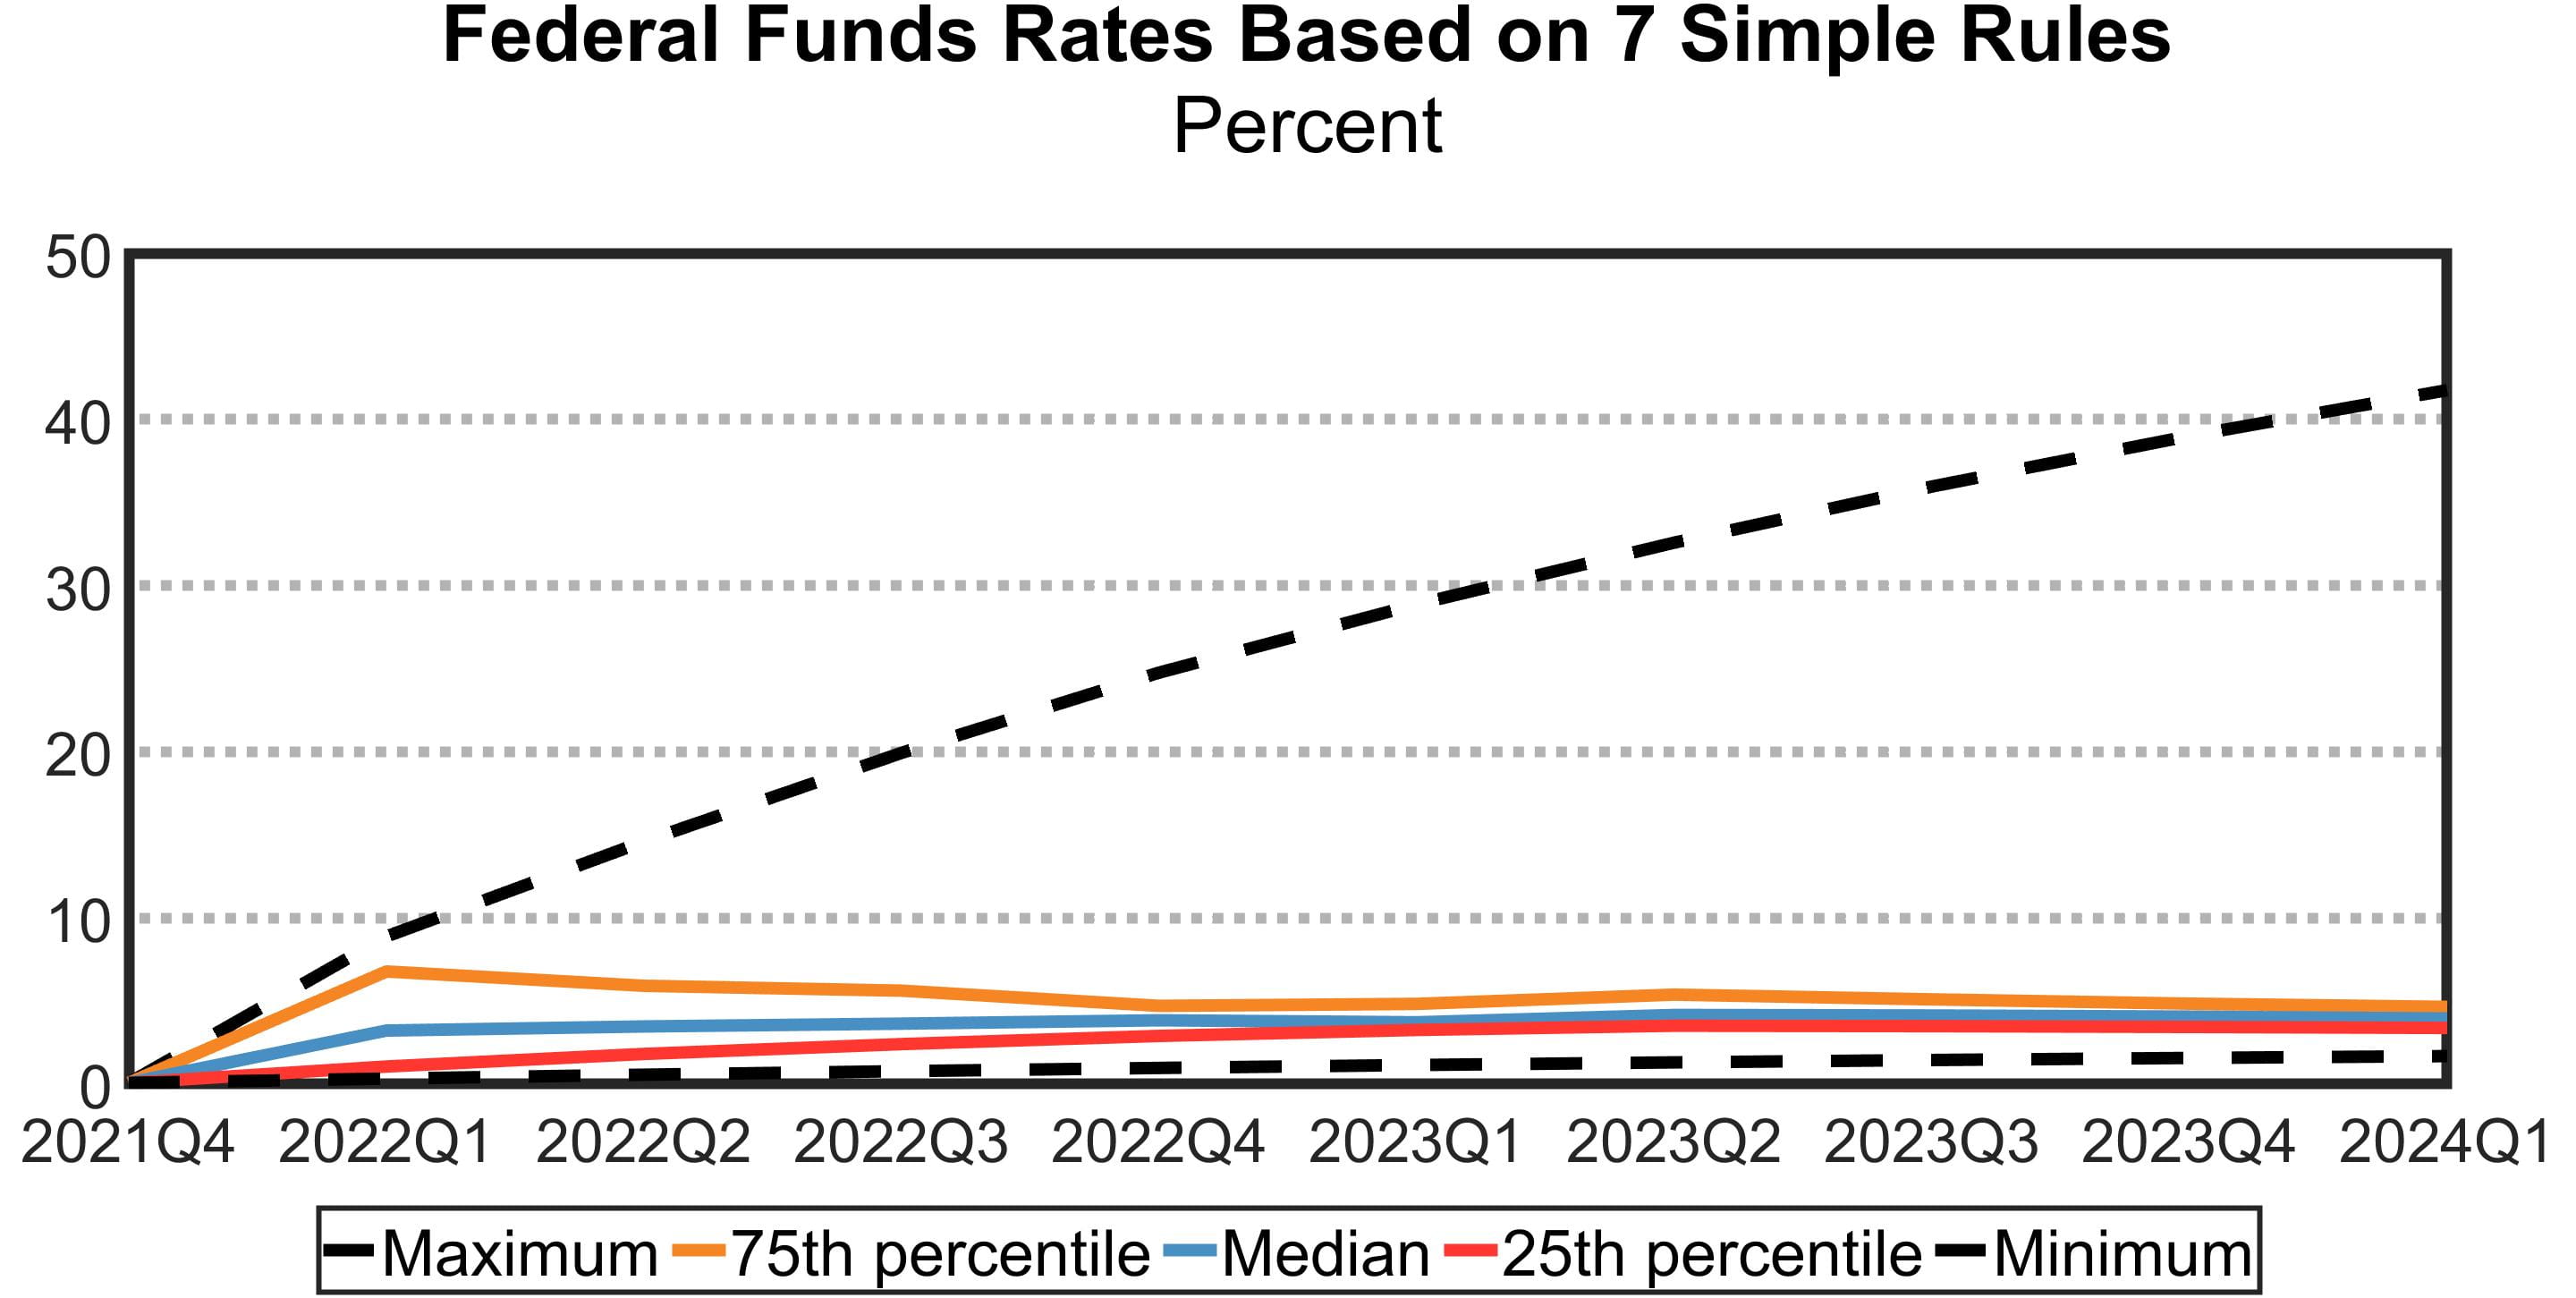 Federal Funds Rates Based on 7 Simple Rules